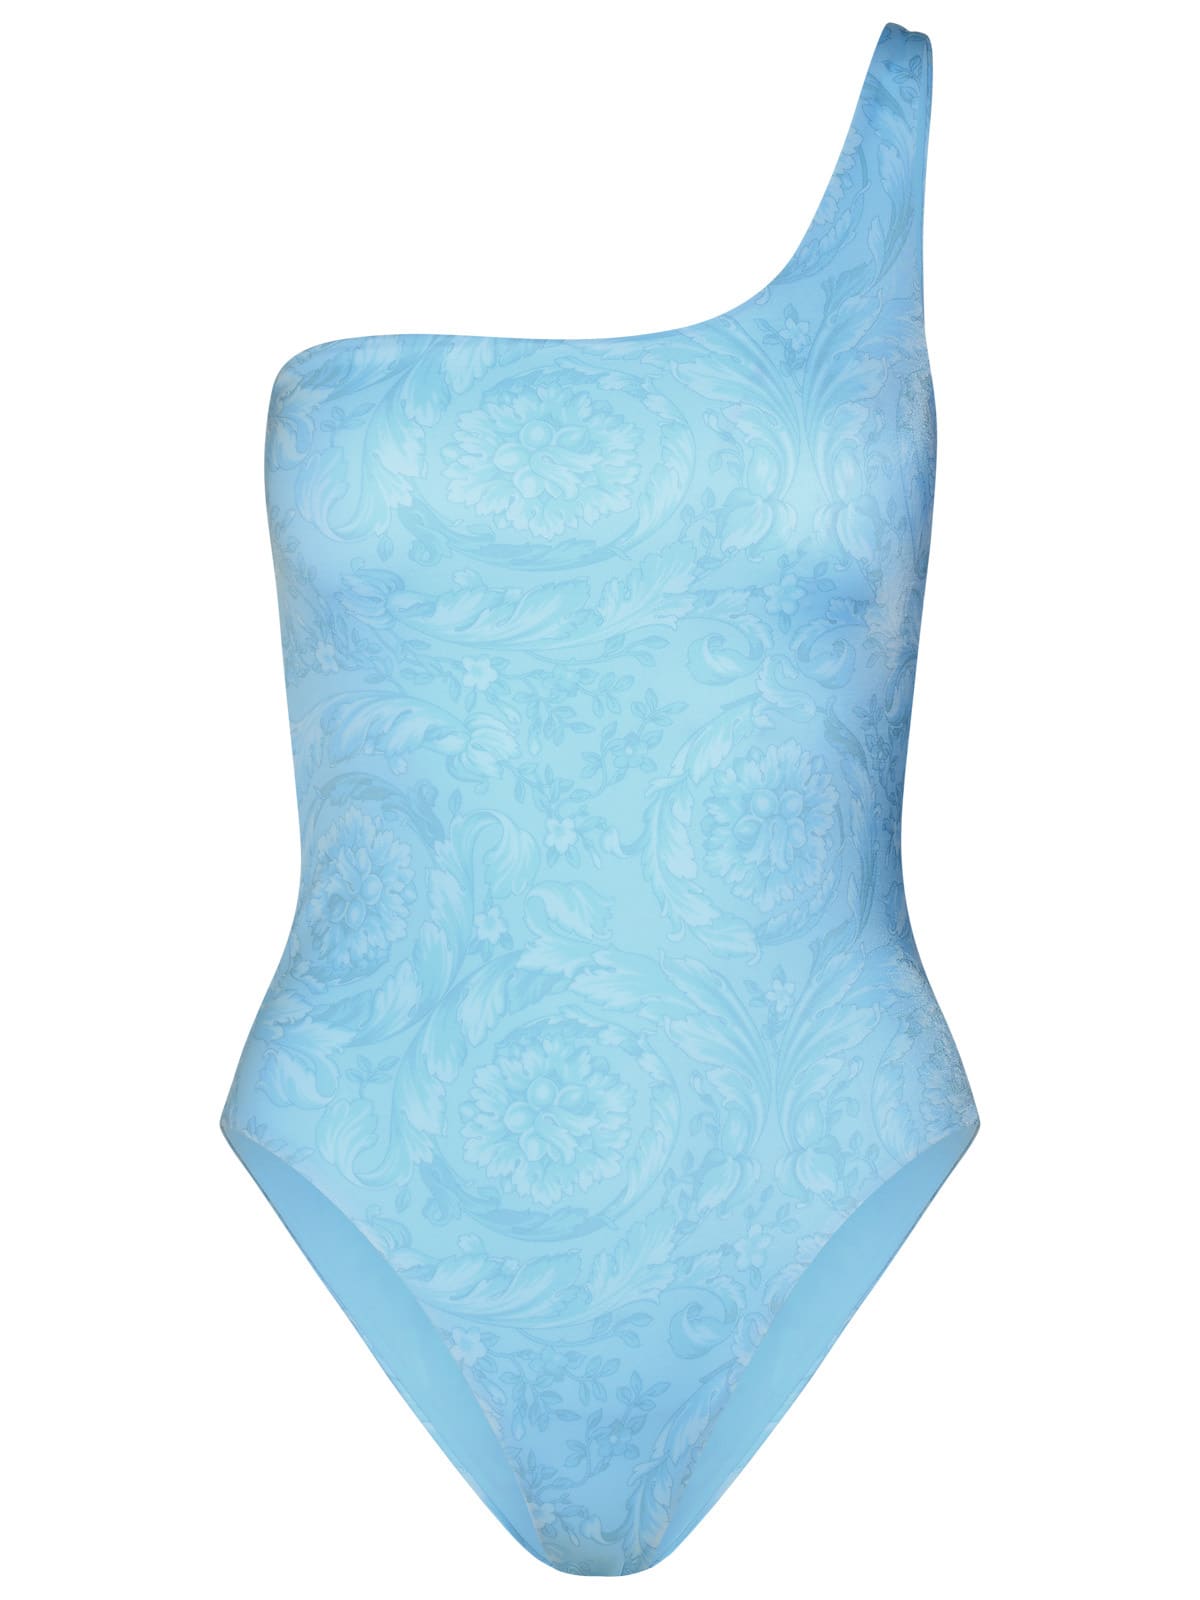 Asymmetric barocco One-piece Swimsuit In Light Blue Polyester Blend